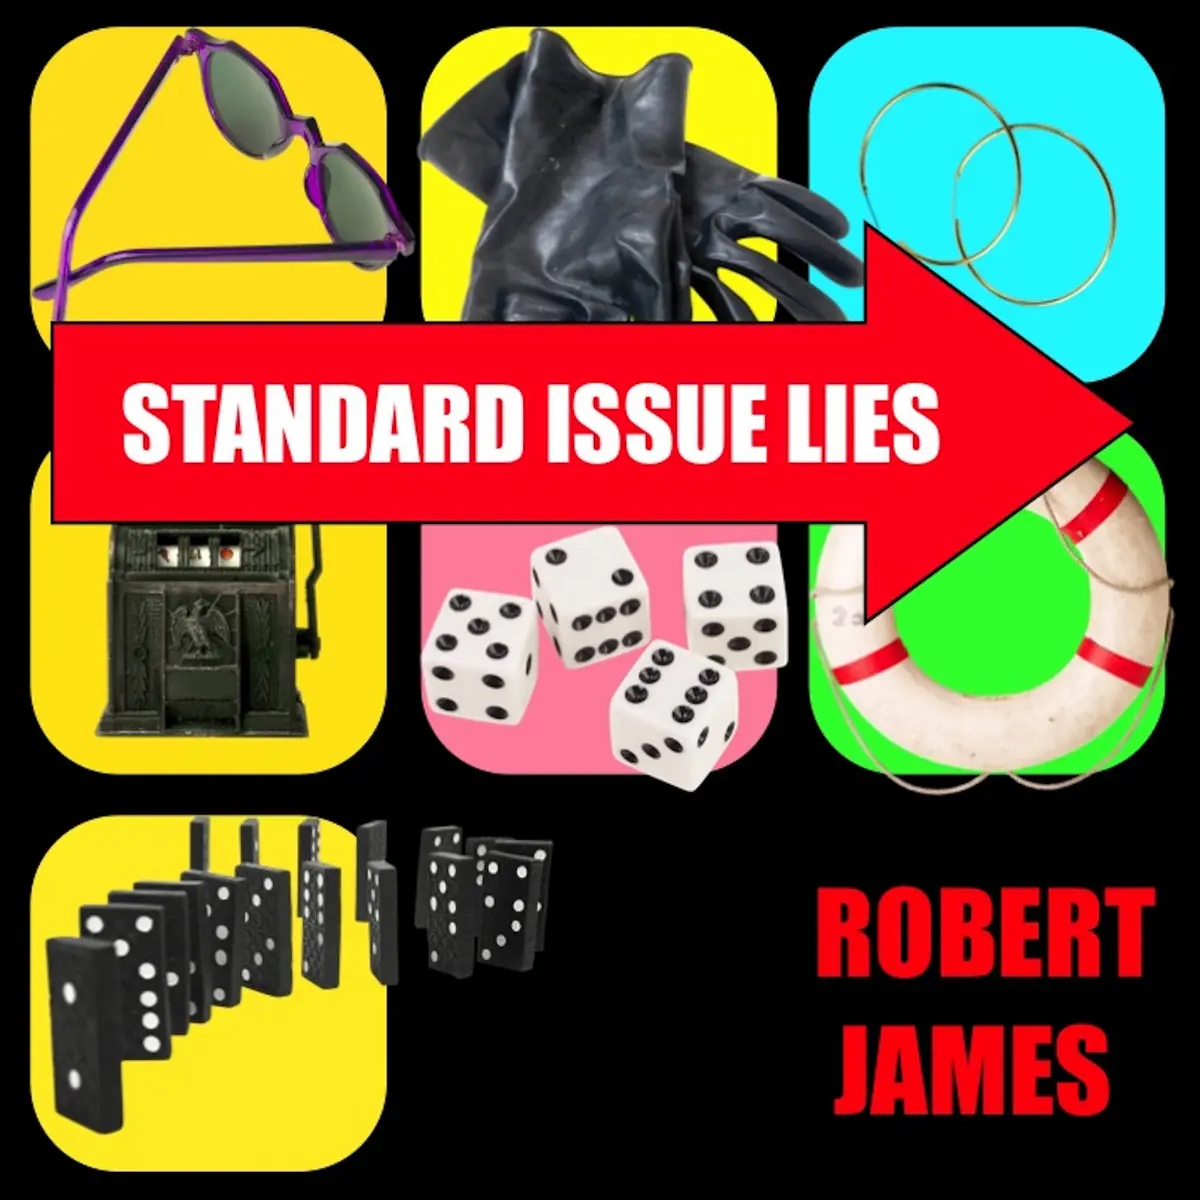 As series of images in squares, representing various lies ... dice, gloves, slot machine ...